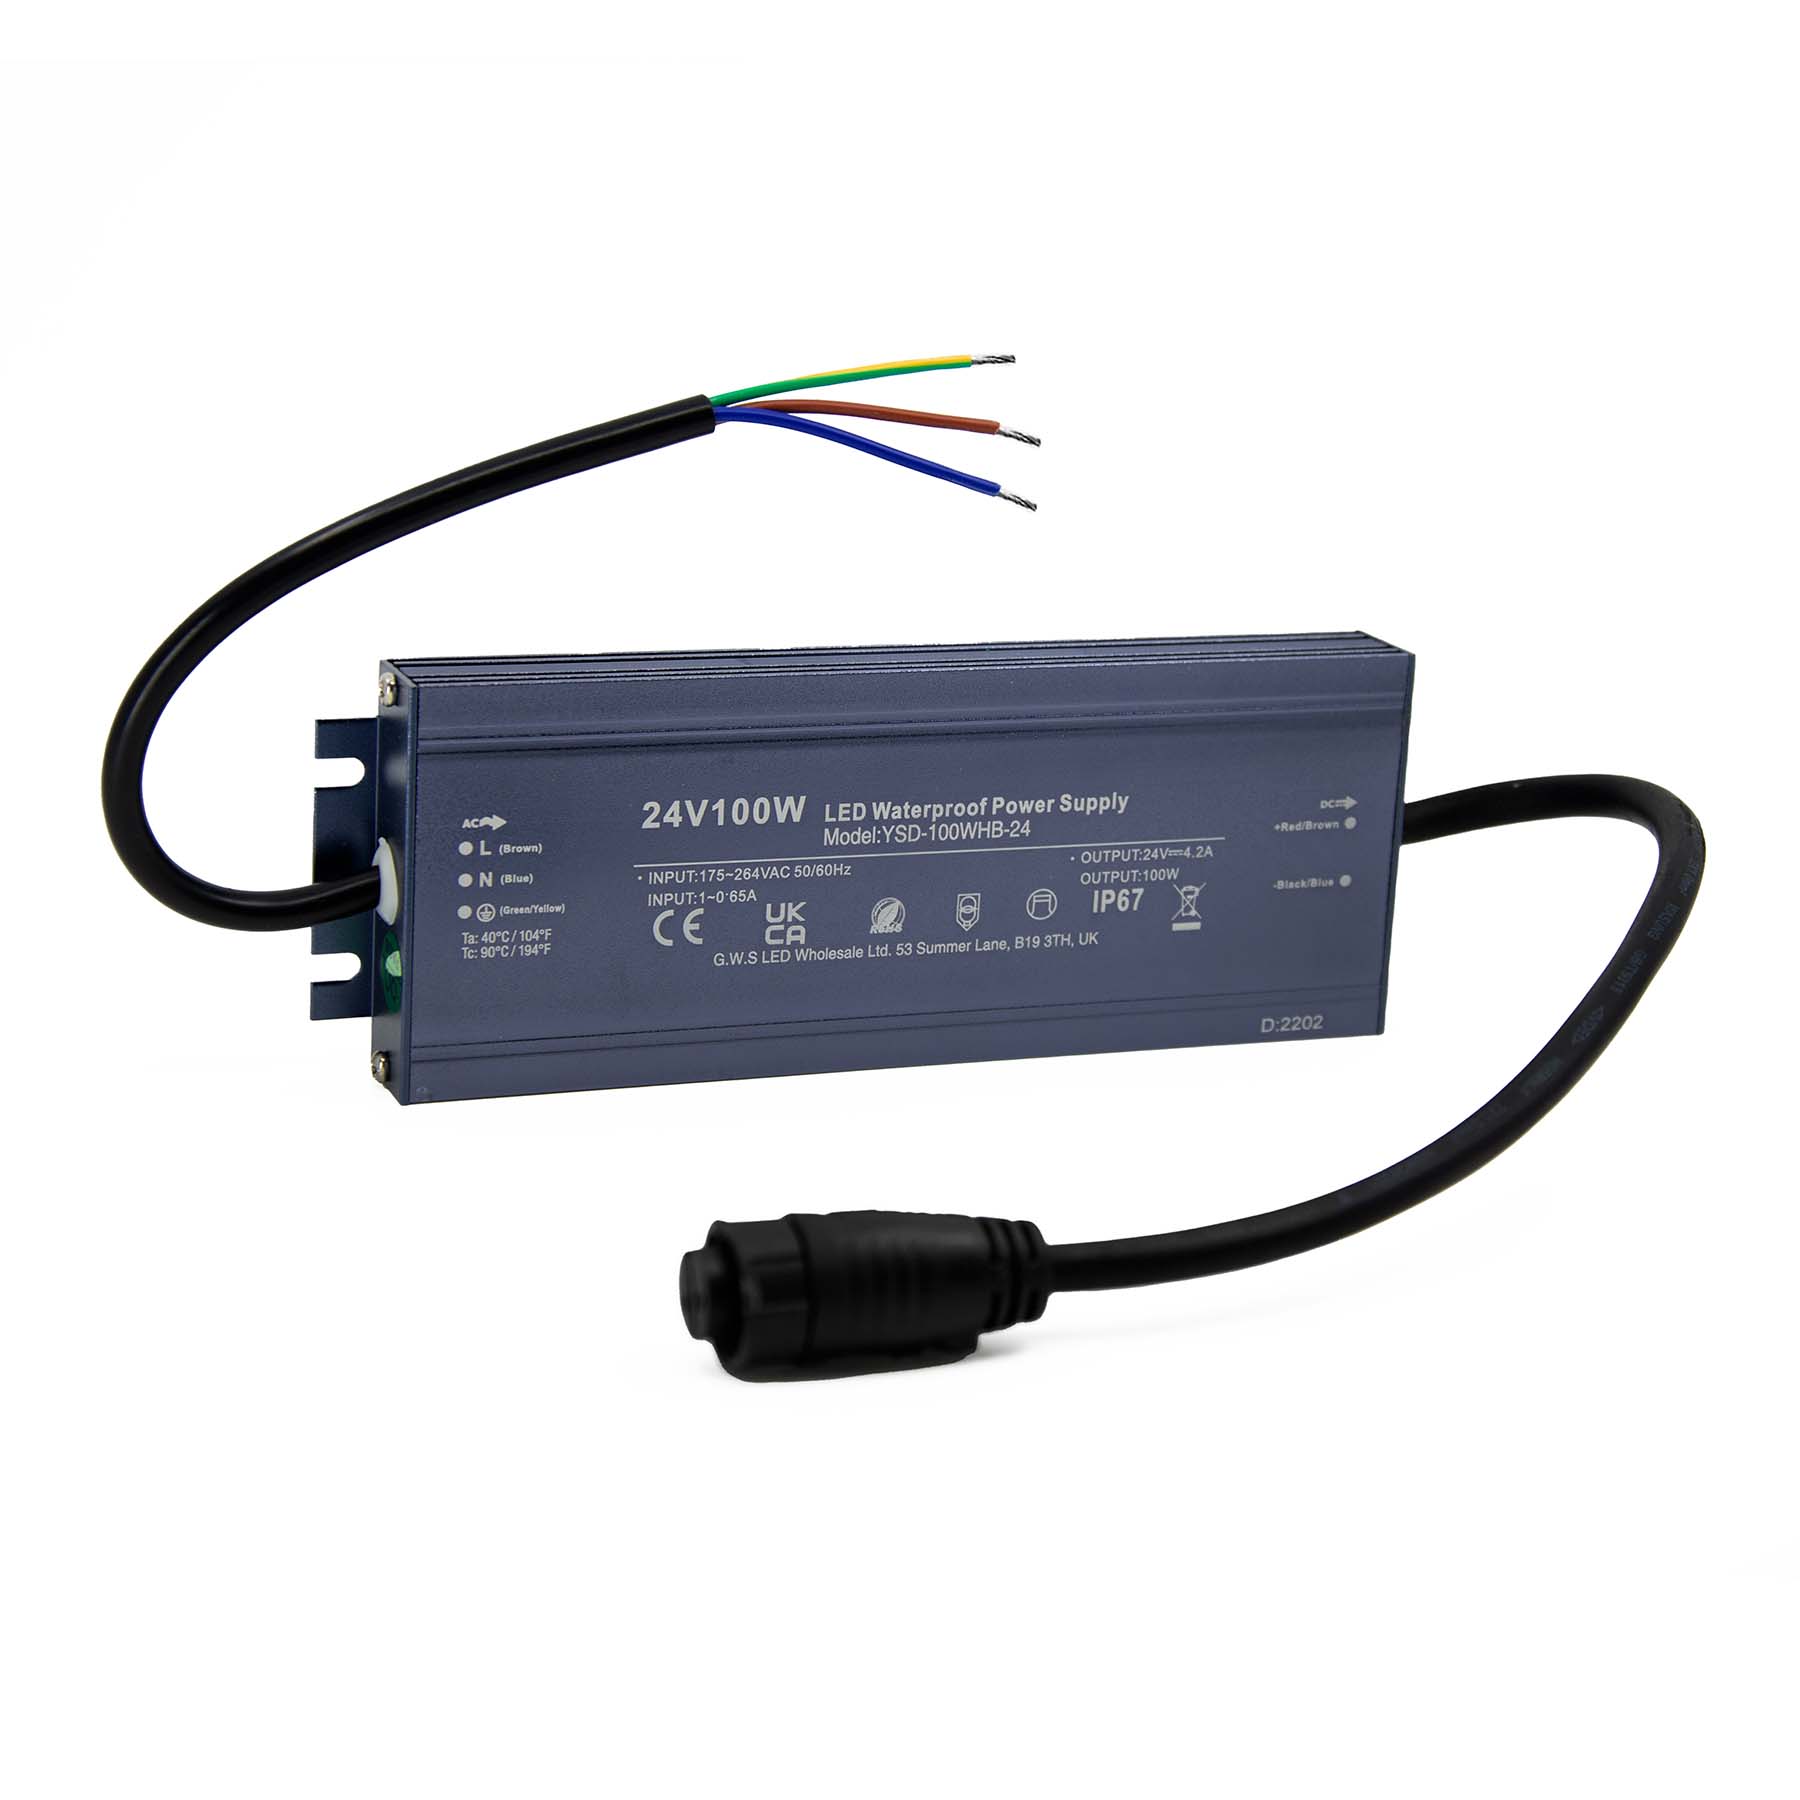 G.W.S LED Wholesale LED Drivers/LED Power Supplies IP67 (Waterproof) IP67 Waterproof 24V 4.2A 100W LED Wall Washer Driver